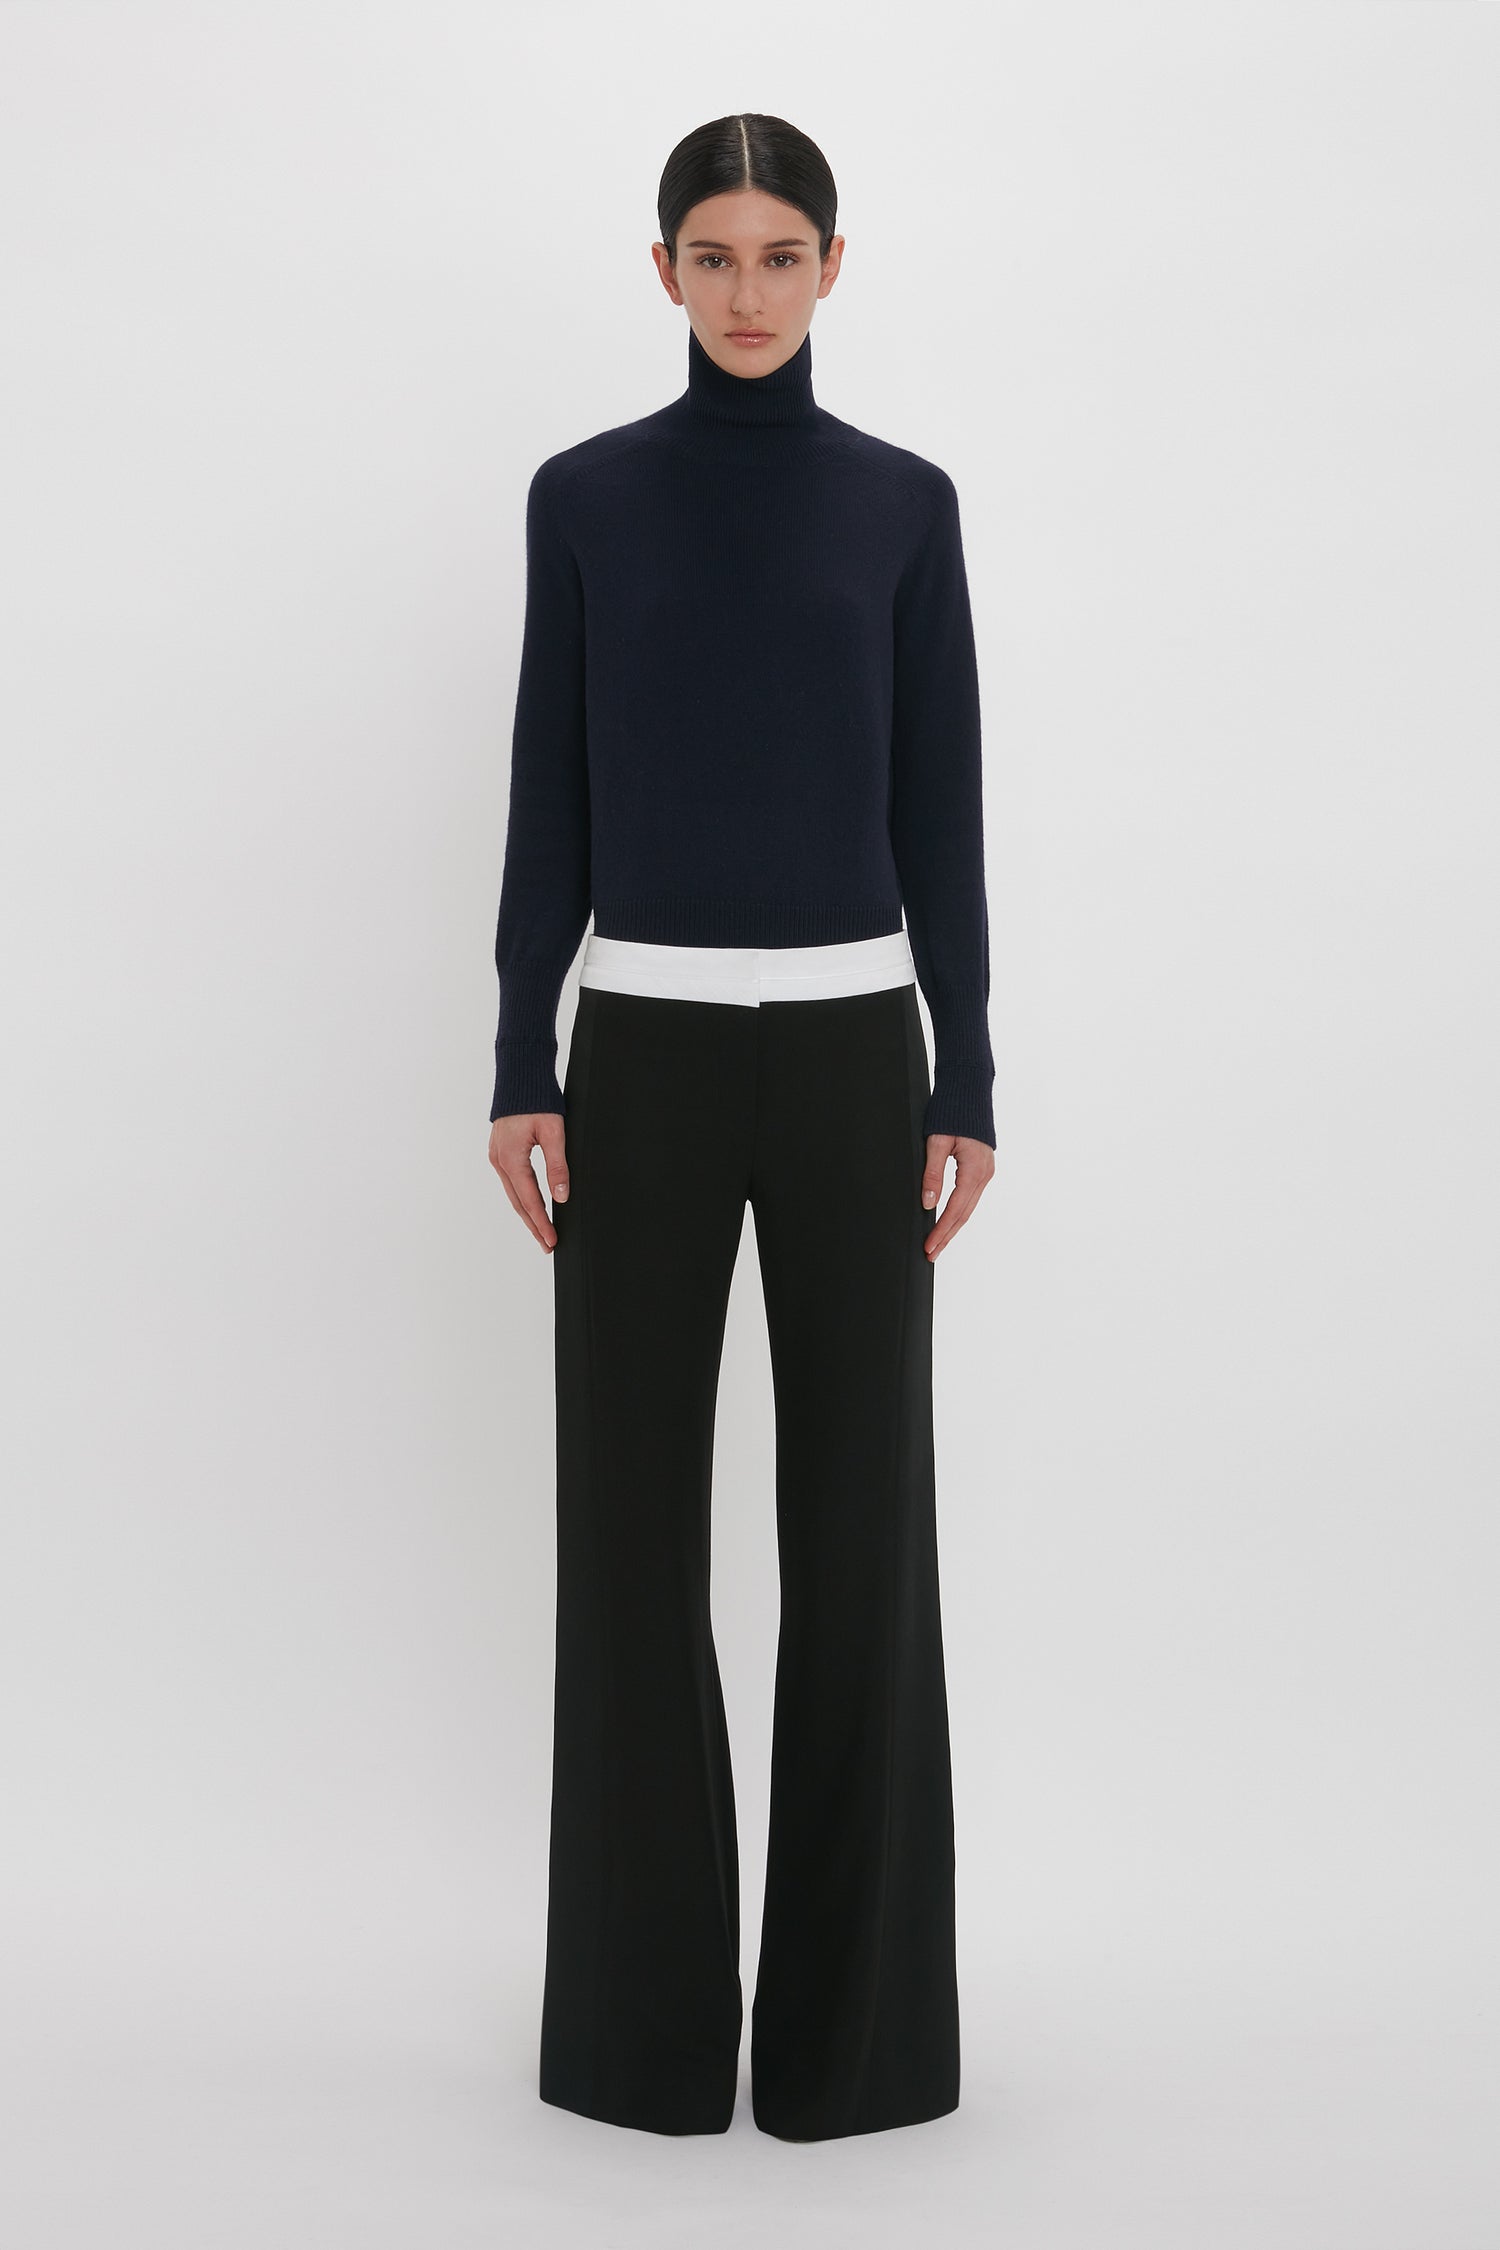 A person stands against a plain white background wearing a dark turtleneck sweater and Victoria Beckham's Side Panel Trouser In Black.